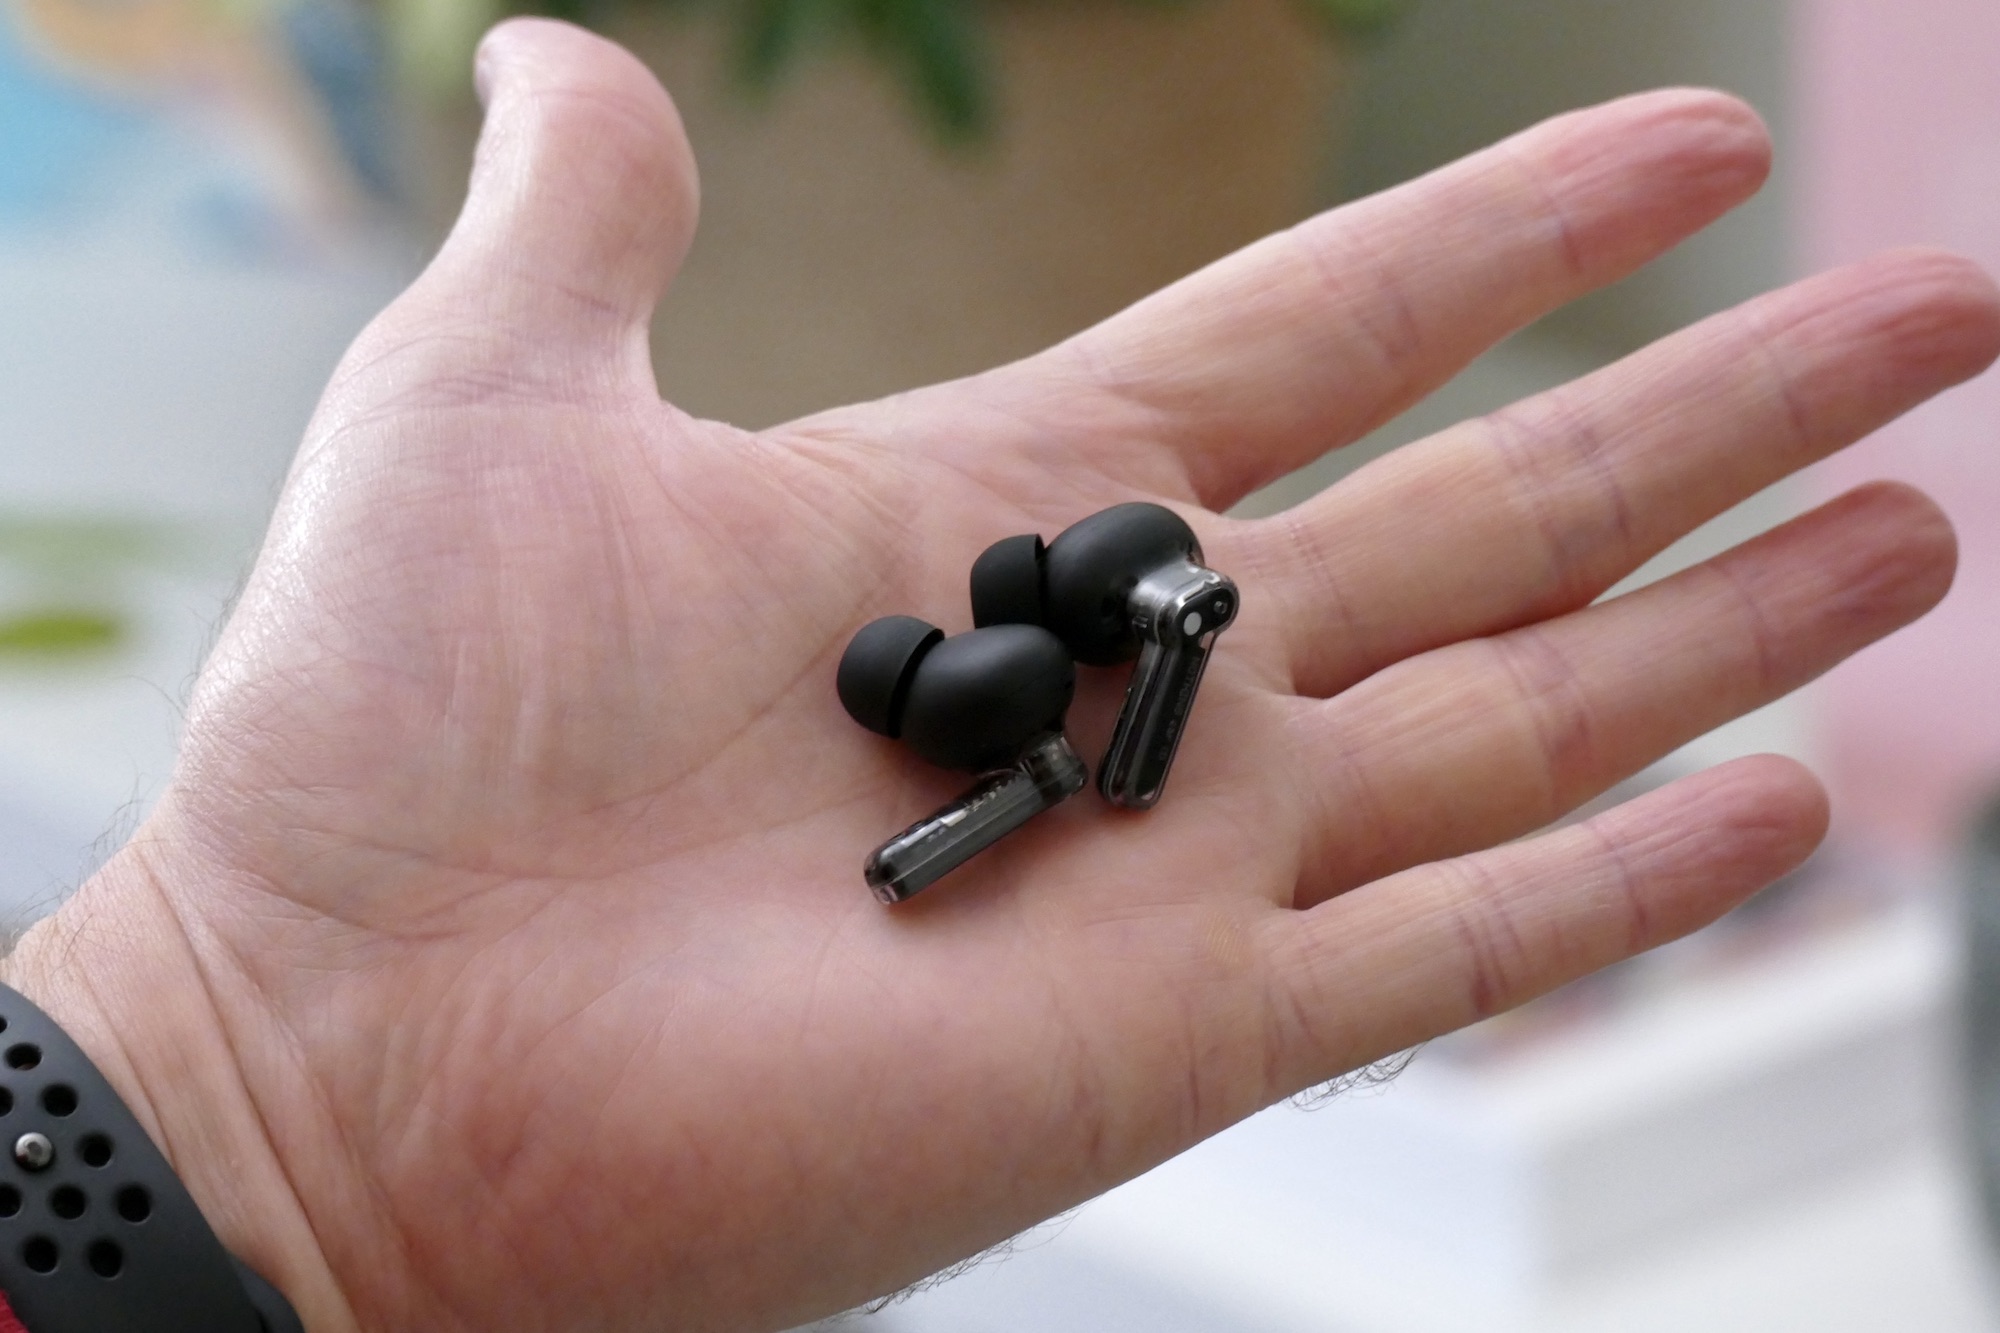 Nothing Ear 1 Black Edition earbuds in hand.